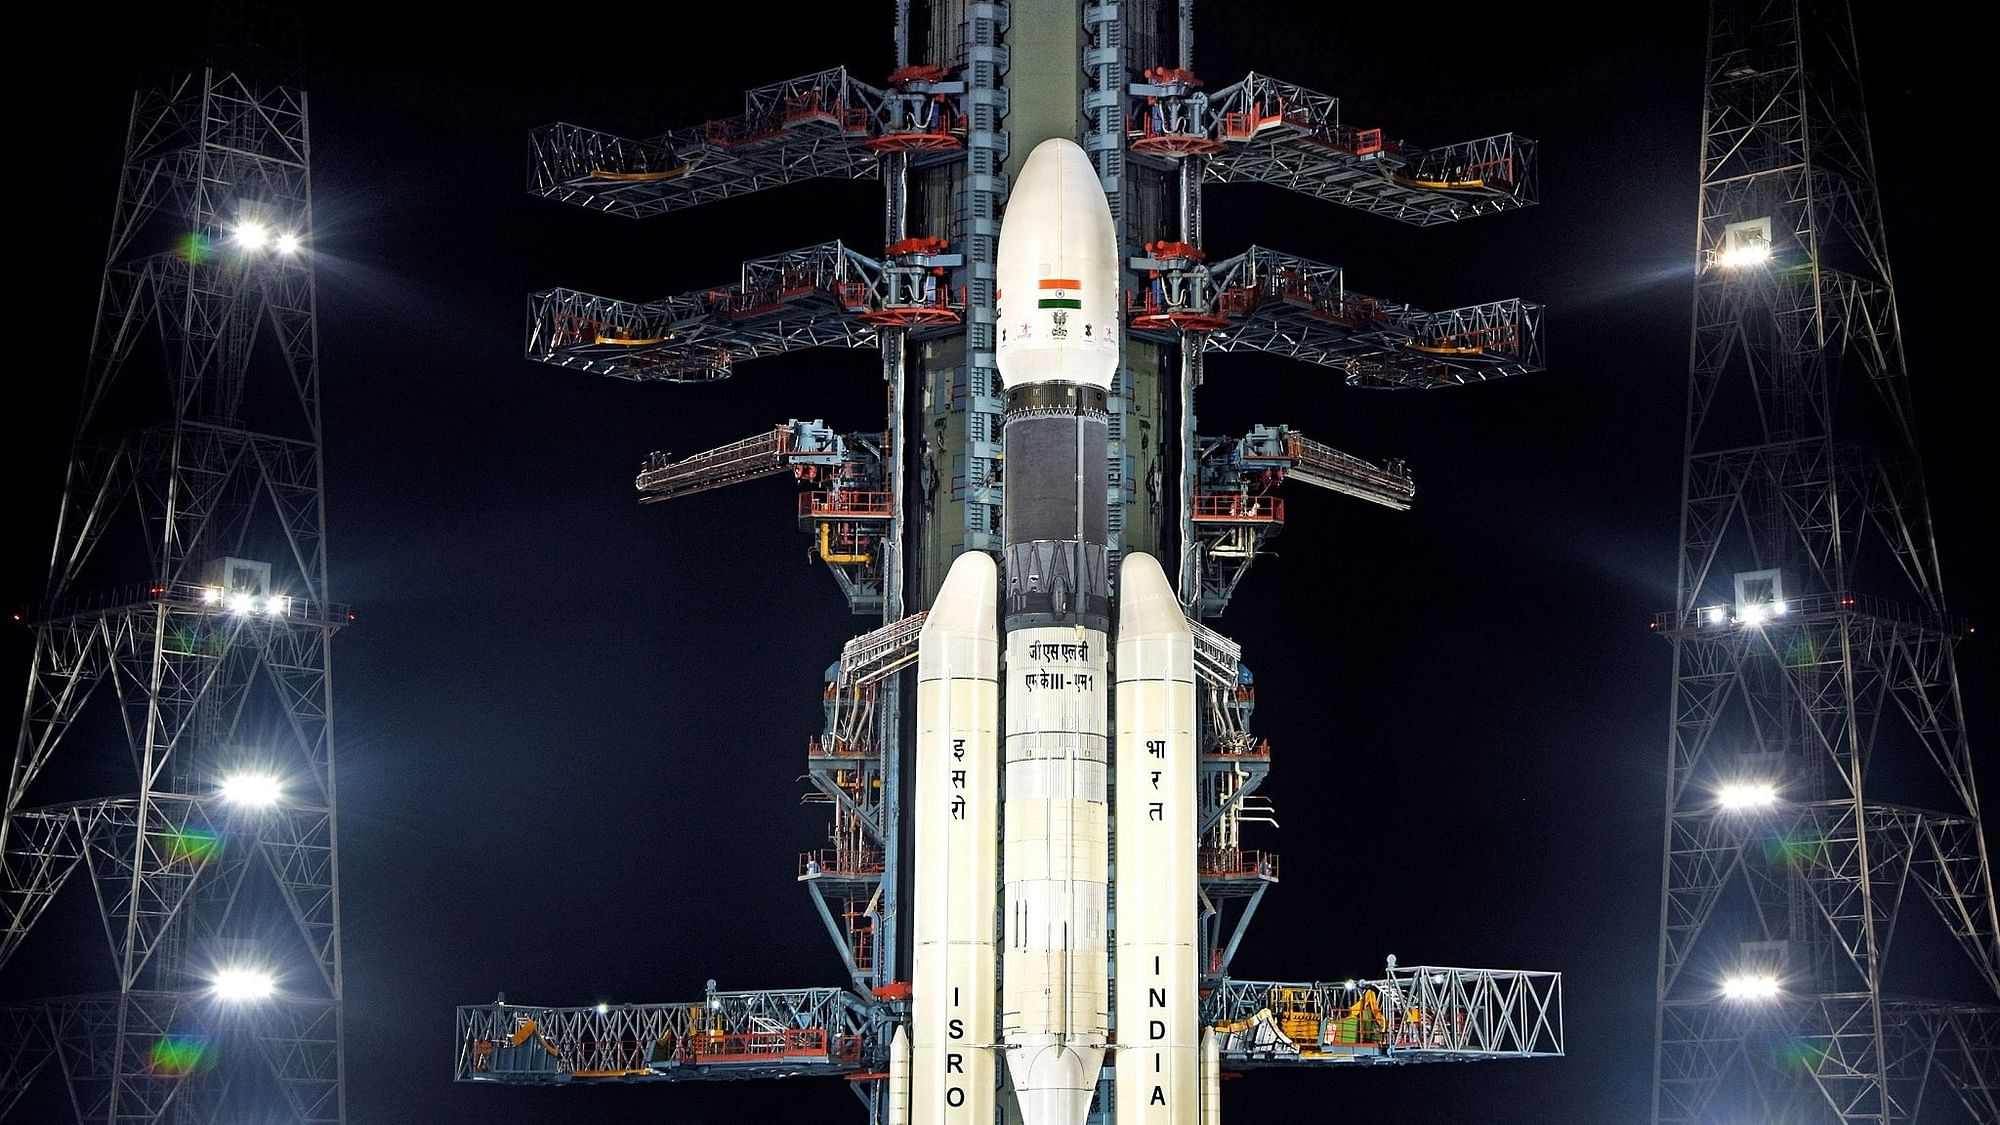 ISRO had launched a space quiz ahead of Chandrayaan-2’s completion in September.